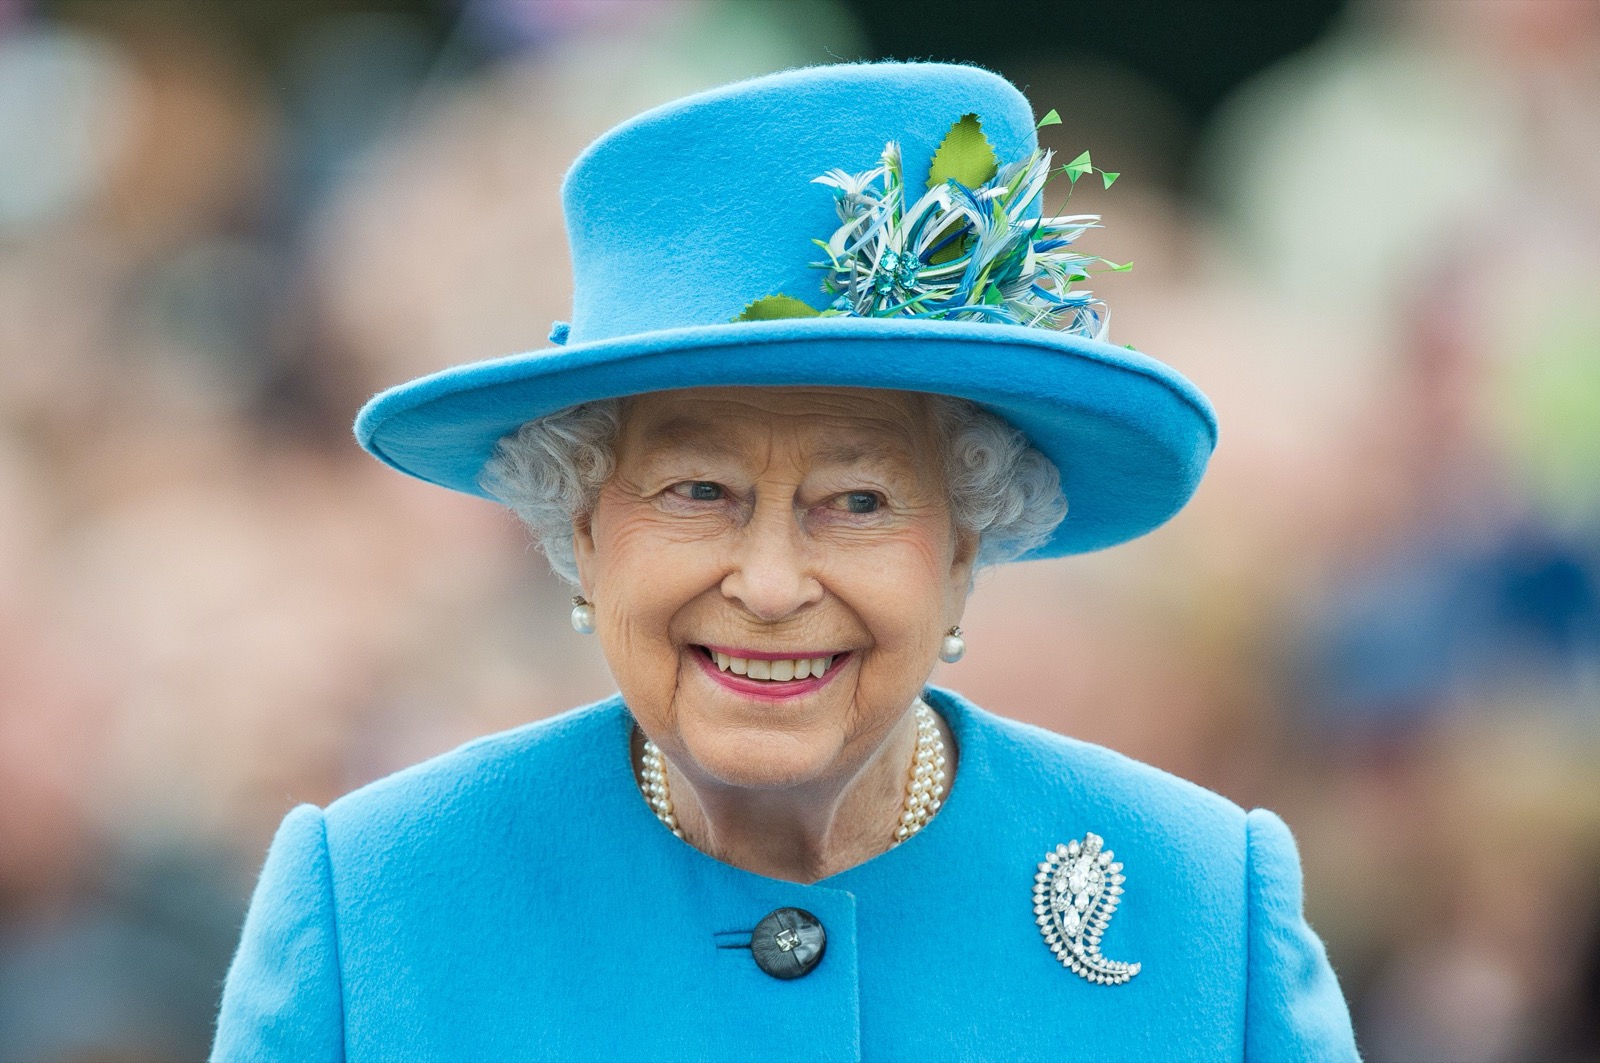 Passing This General Knowledge Quiz Is the Only Proof You Need to Show You’re the Smart Friend Queen Elizabeth II